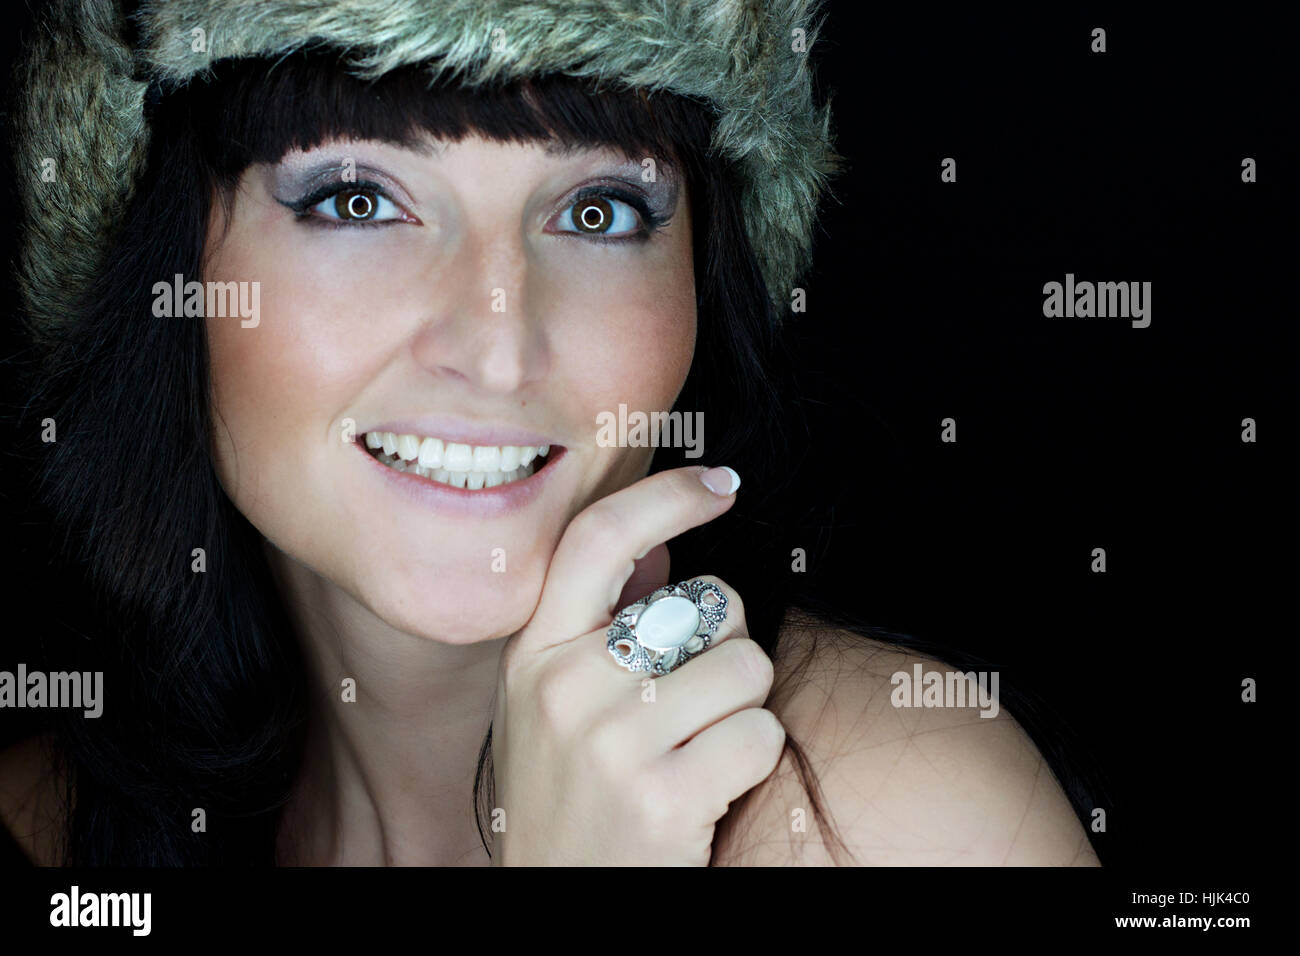 beautiful woman with fur hat Stock Photo